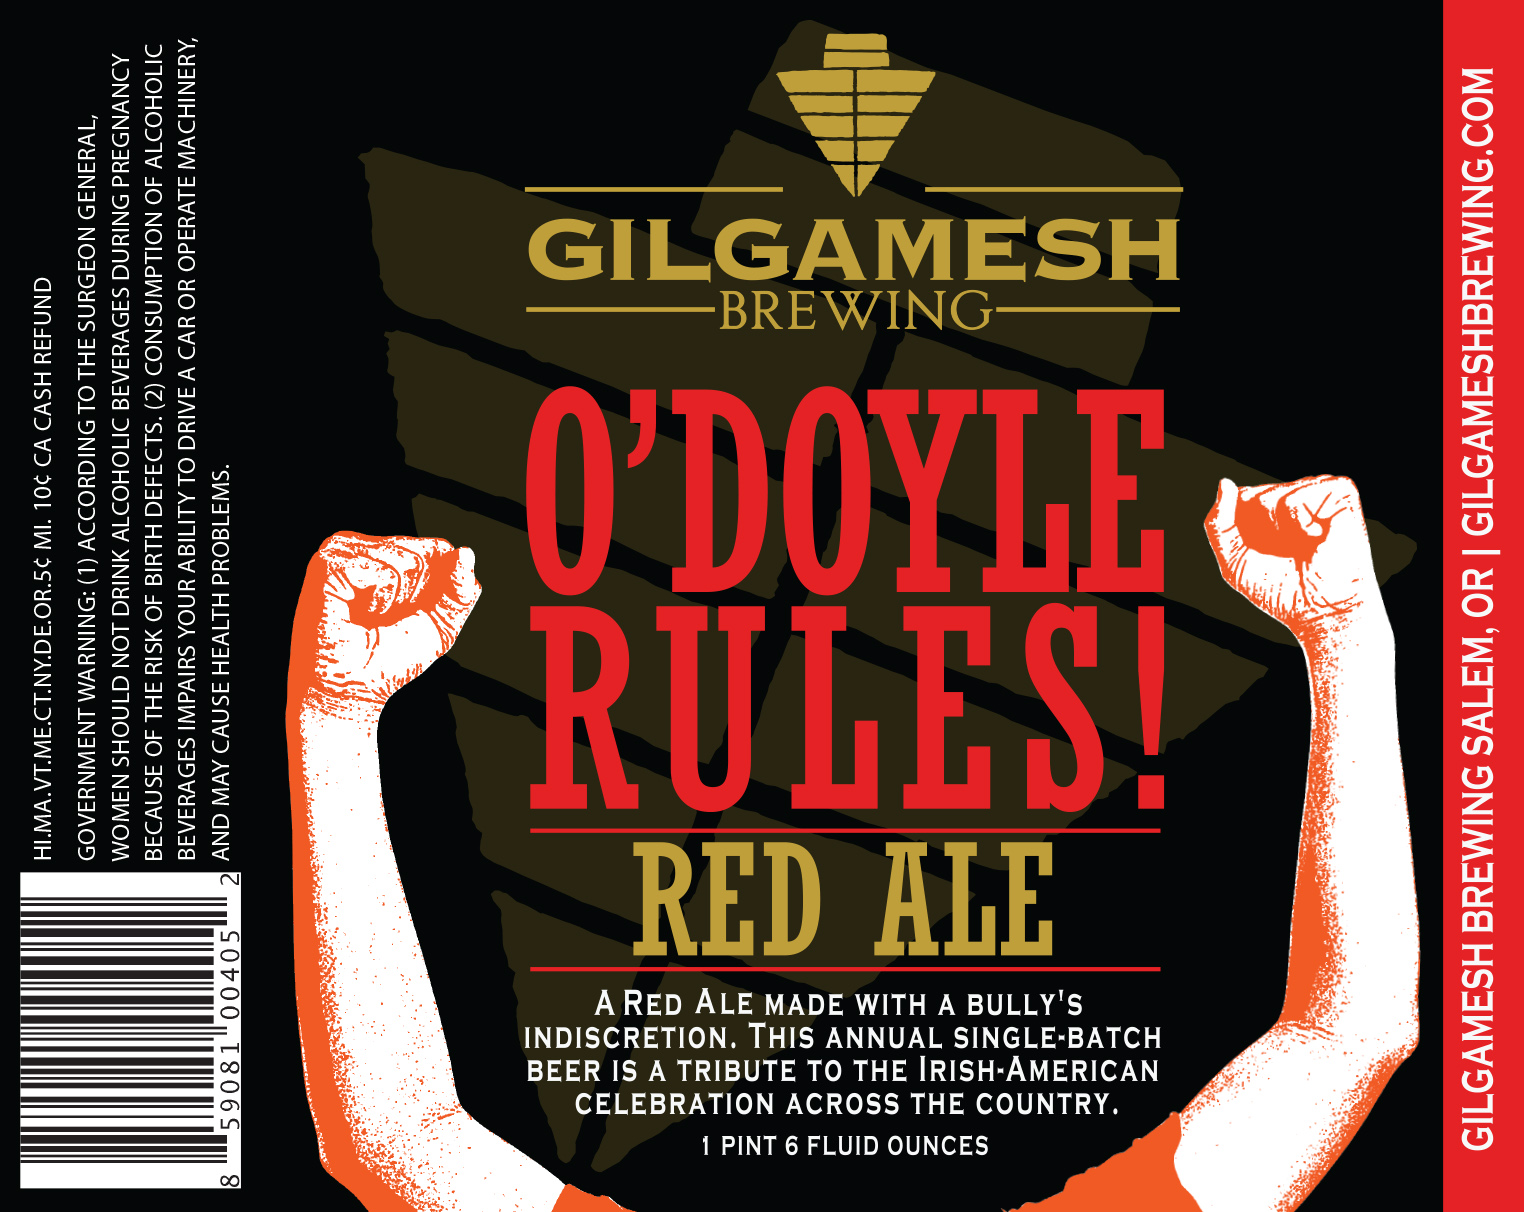 Gilgamesh Brewing O'Doyle Rules Red Ale